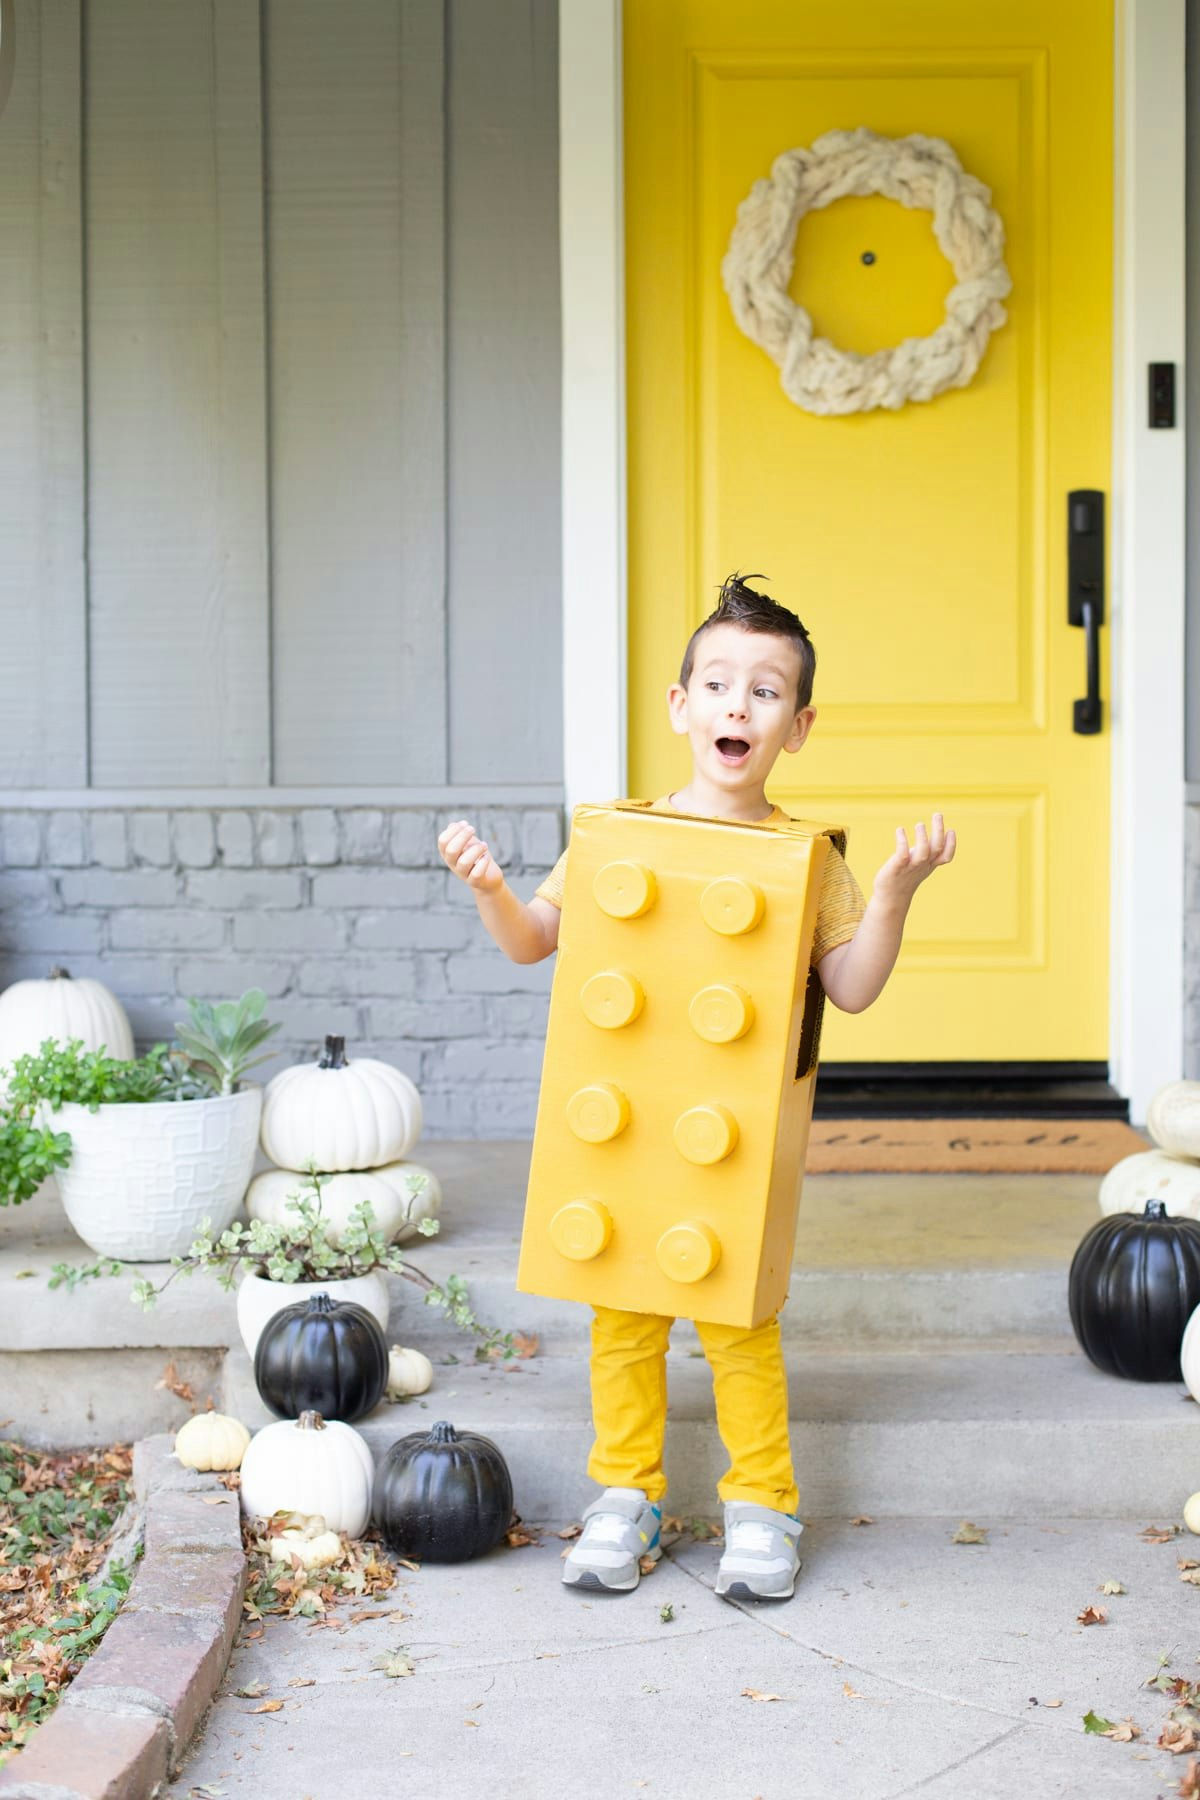 21 Homemade Halloween Costumes That Are Actually Brilliant